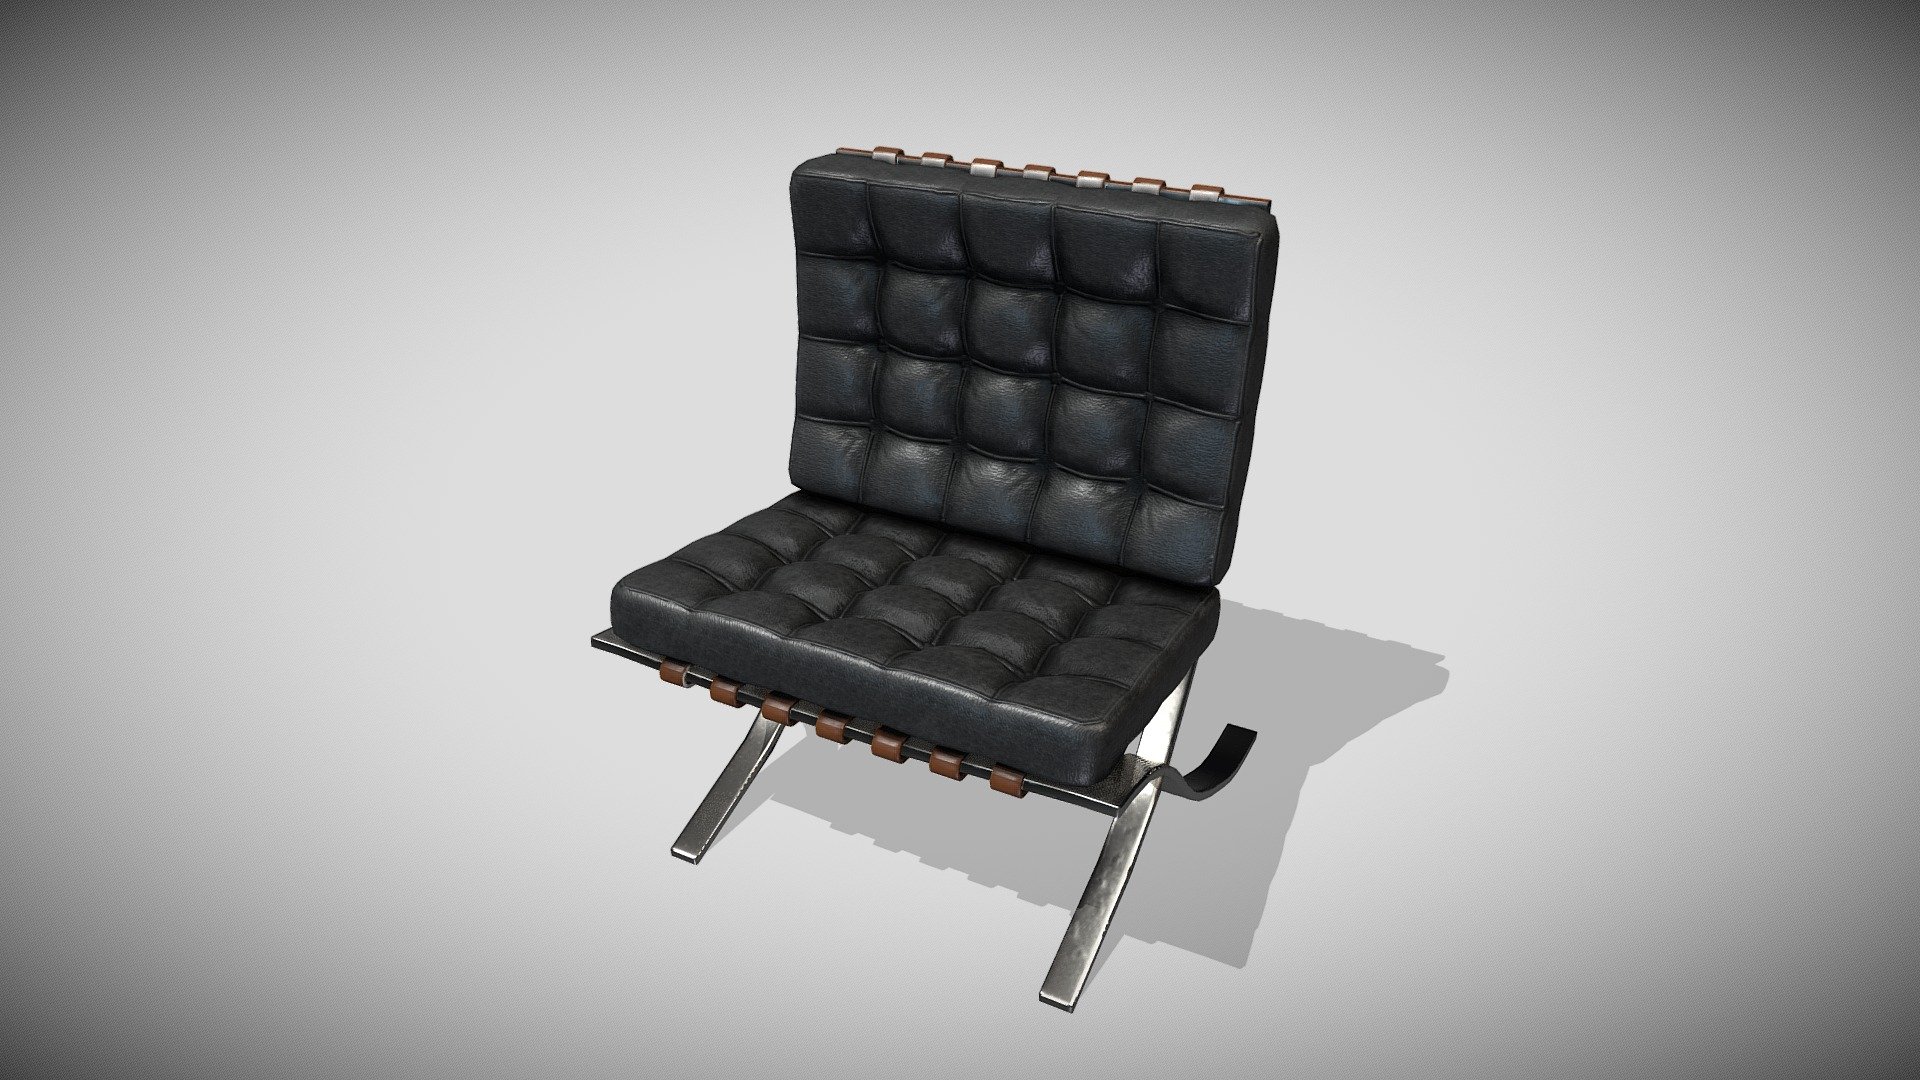 A modern looking armchair in Ottoman style.

Tri count: 11K.

Texture size: 2048 x 2048 3d model